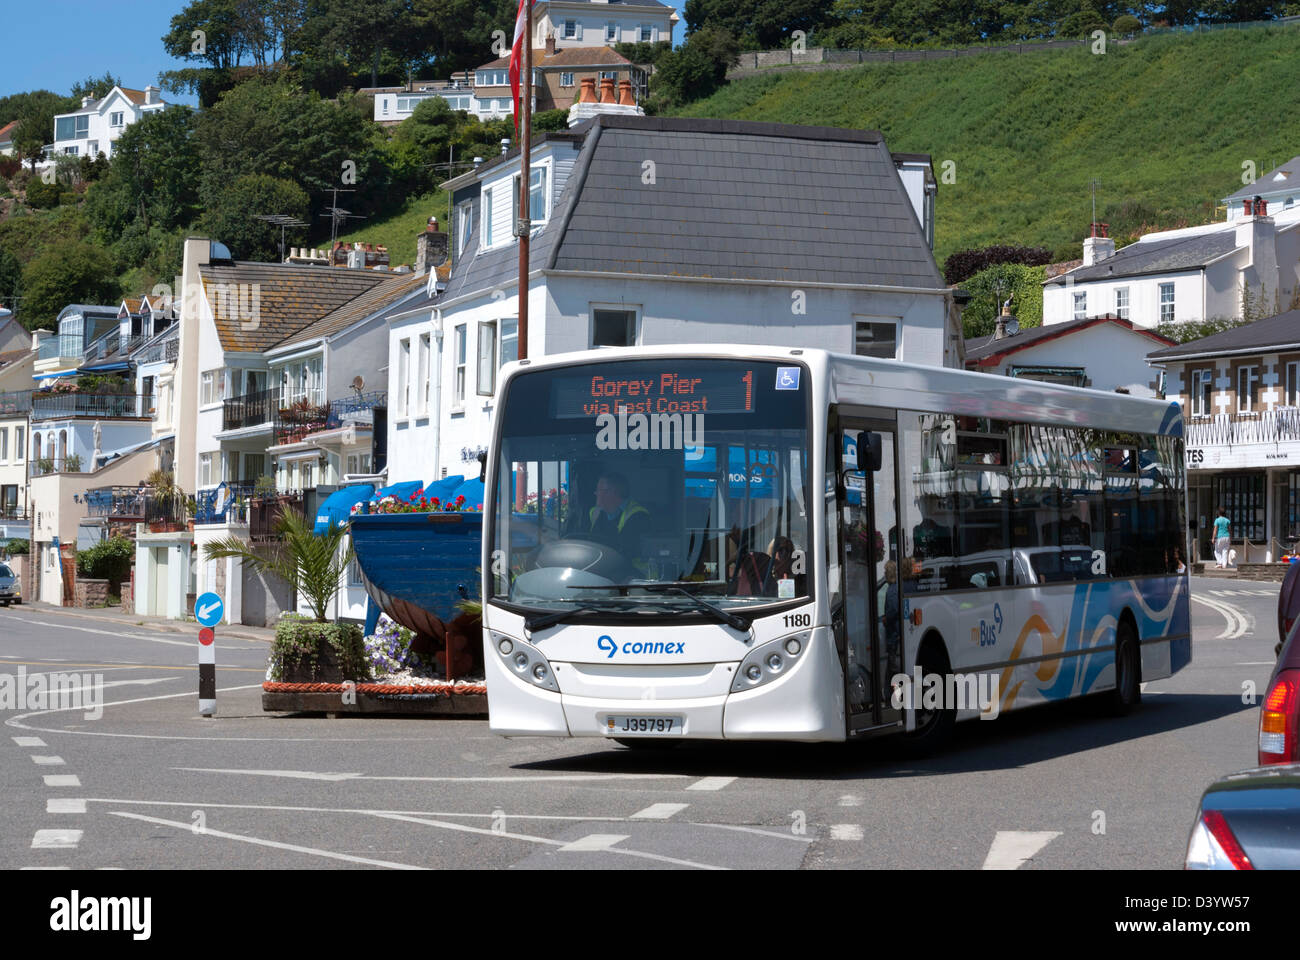 buses jersey channel islands